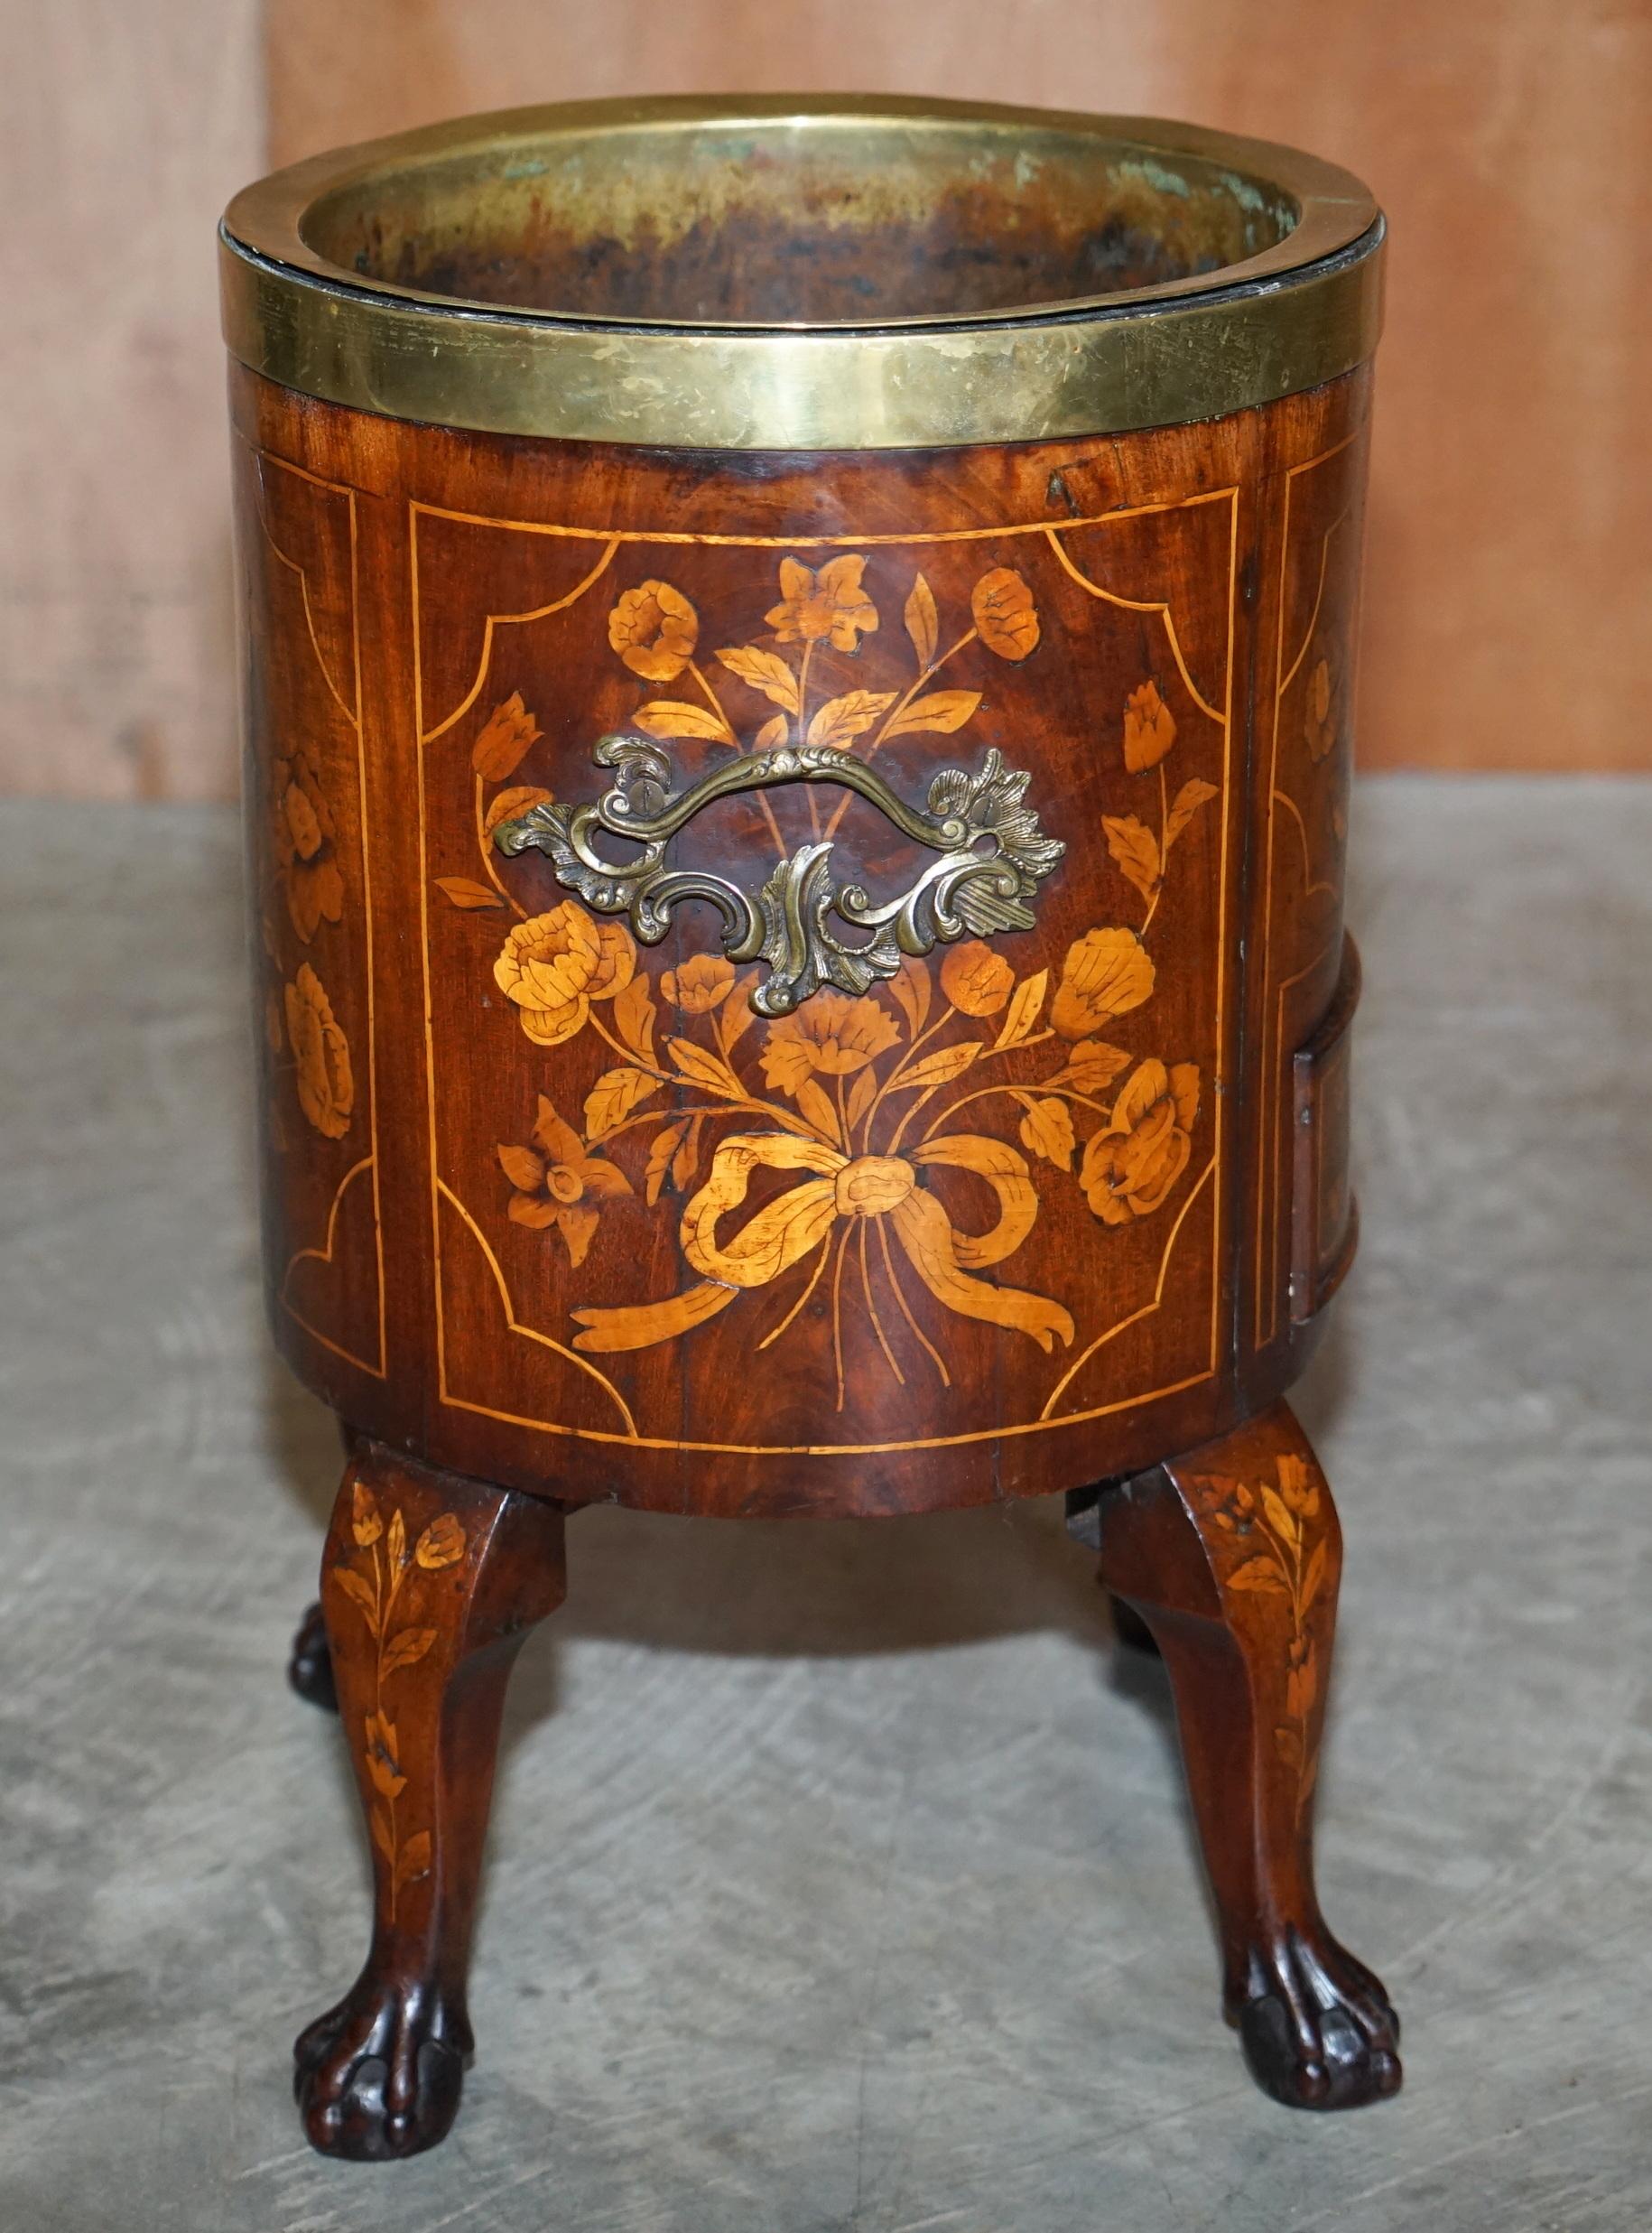 Exquisite Antique circa 1800 Dutch Inlaid Wine Cooler Bucket Claw & Ball Feet For Sale 7